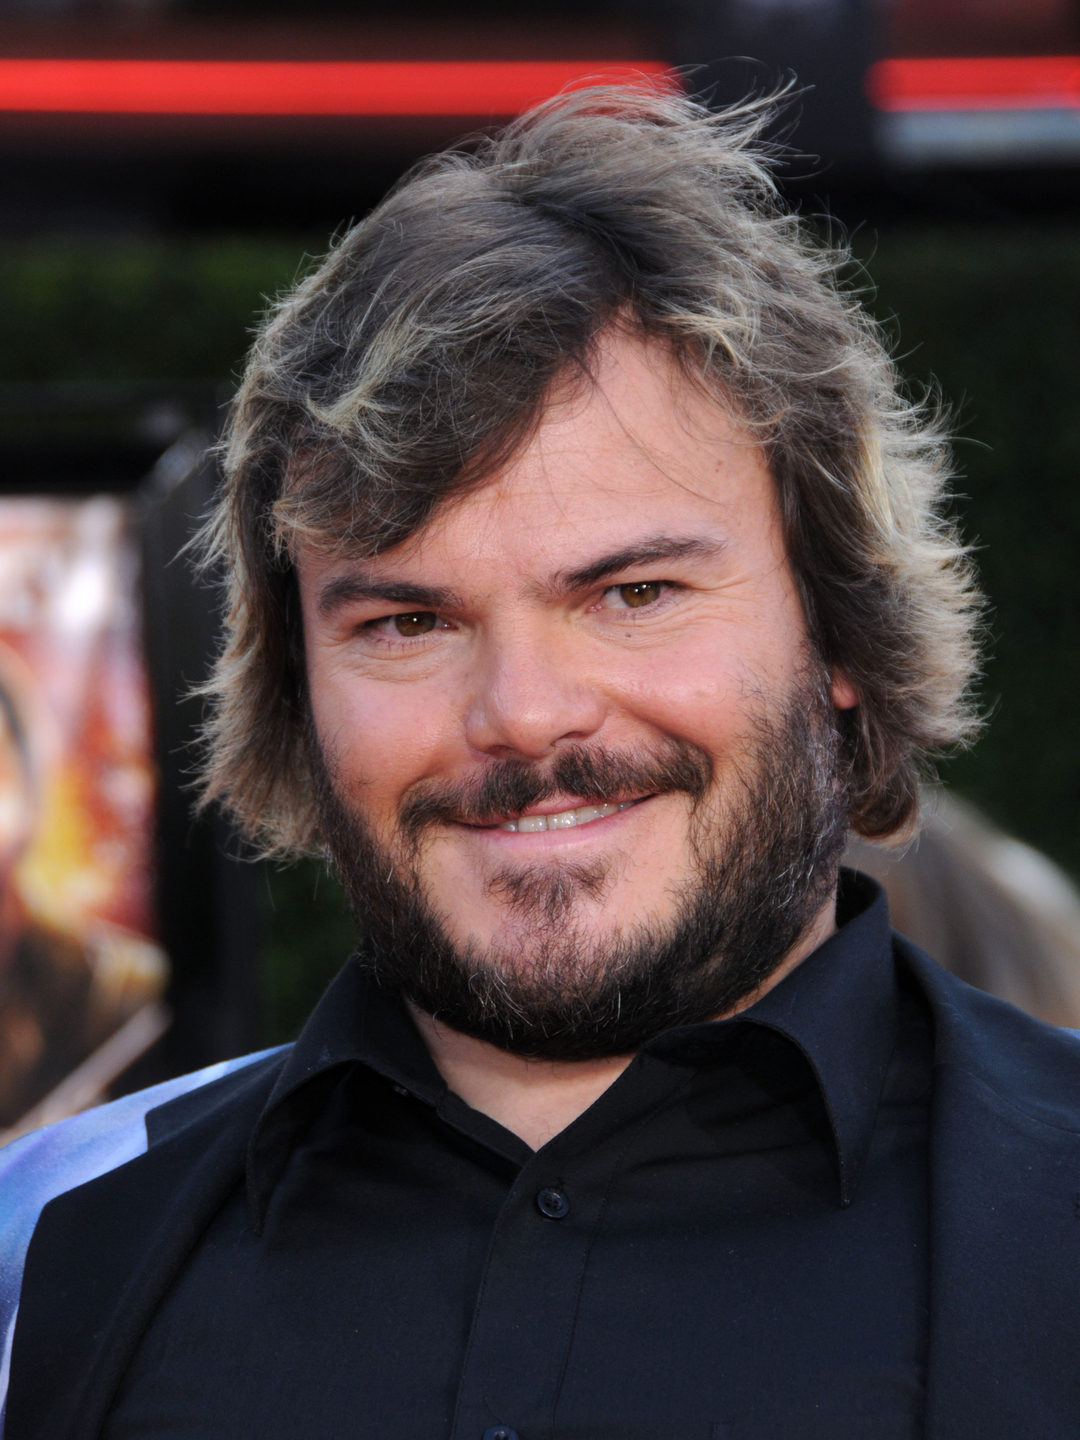 Jack Black does he have a wife